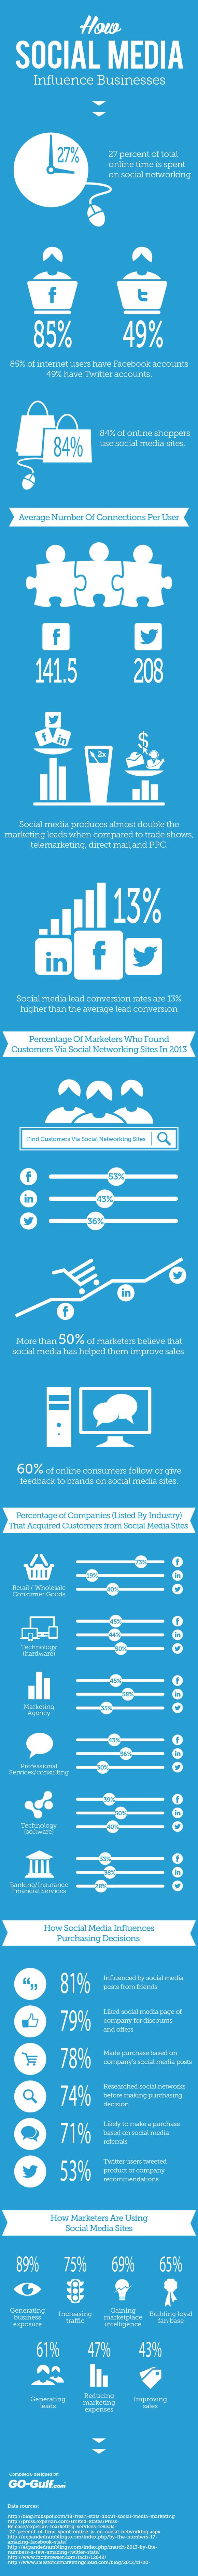 business-social-media-influence-infographic